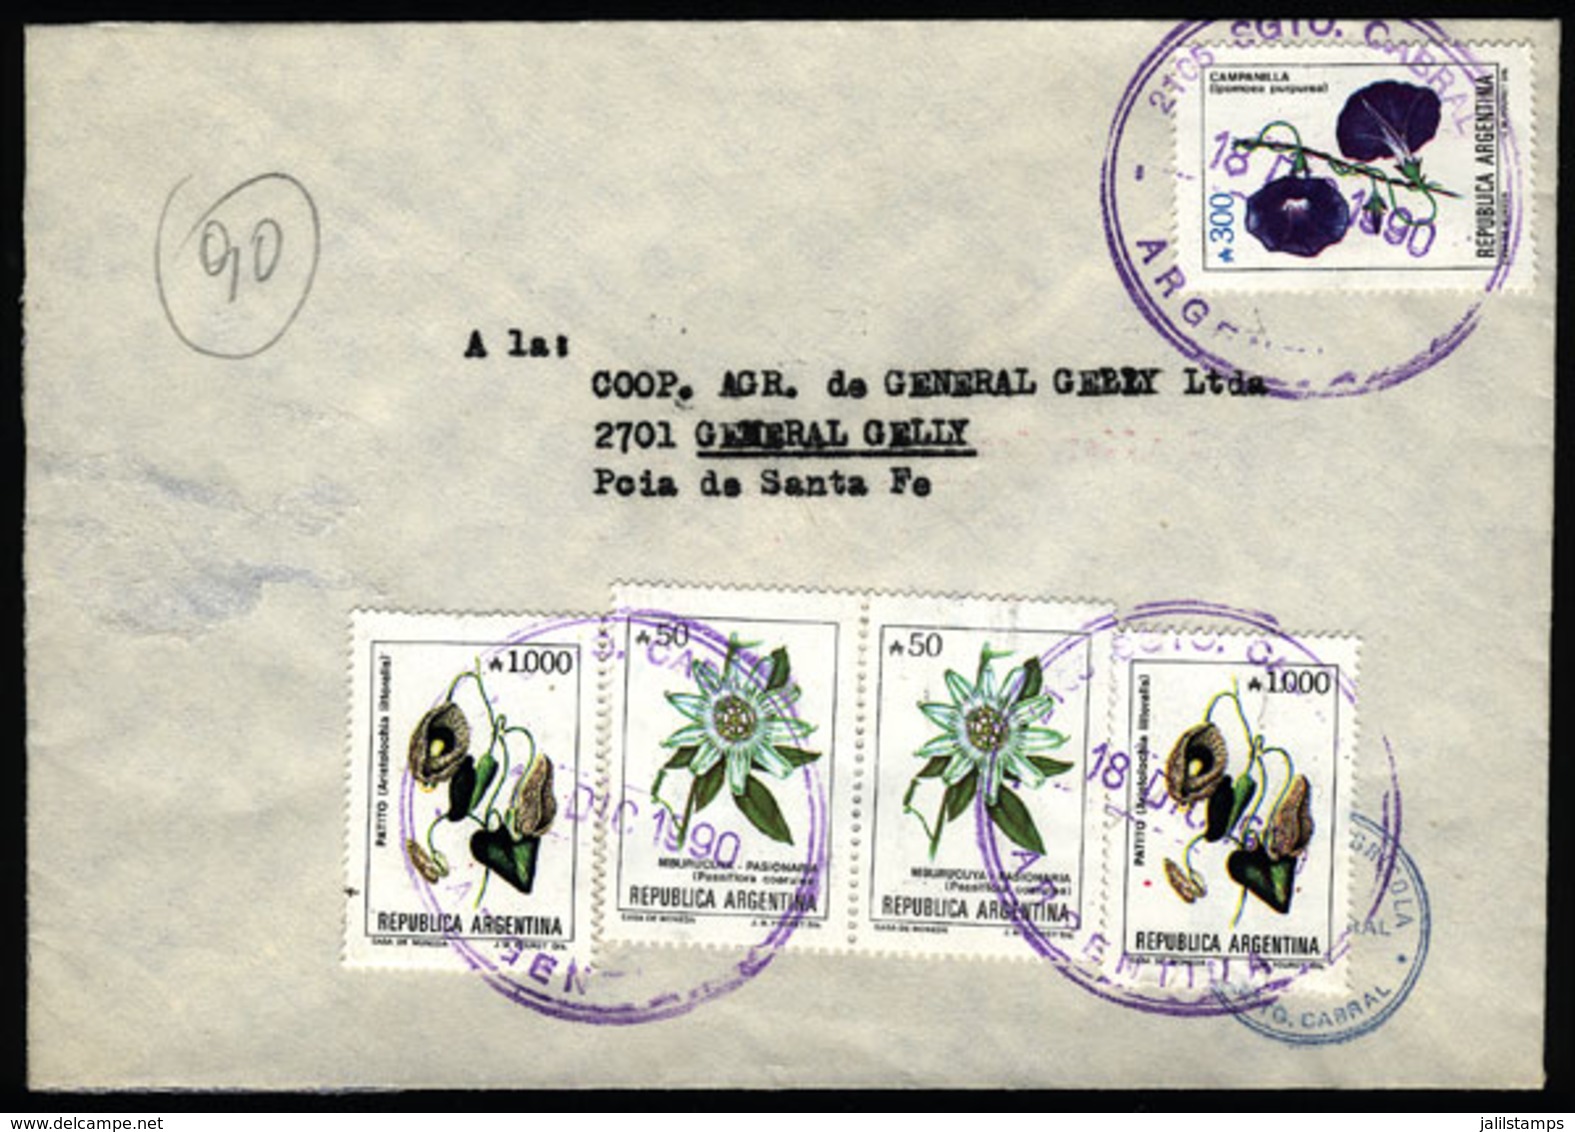 ARGENTINA: Cover Sent From "SGTO. CABRAL" (Santa Fe) To General Gelly (Santa Fe) On 18/DE/1990, With INFLA Postage Of A2 - Covers & Documents